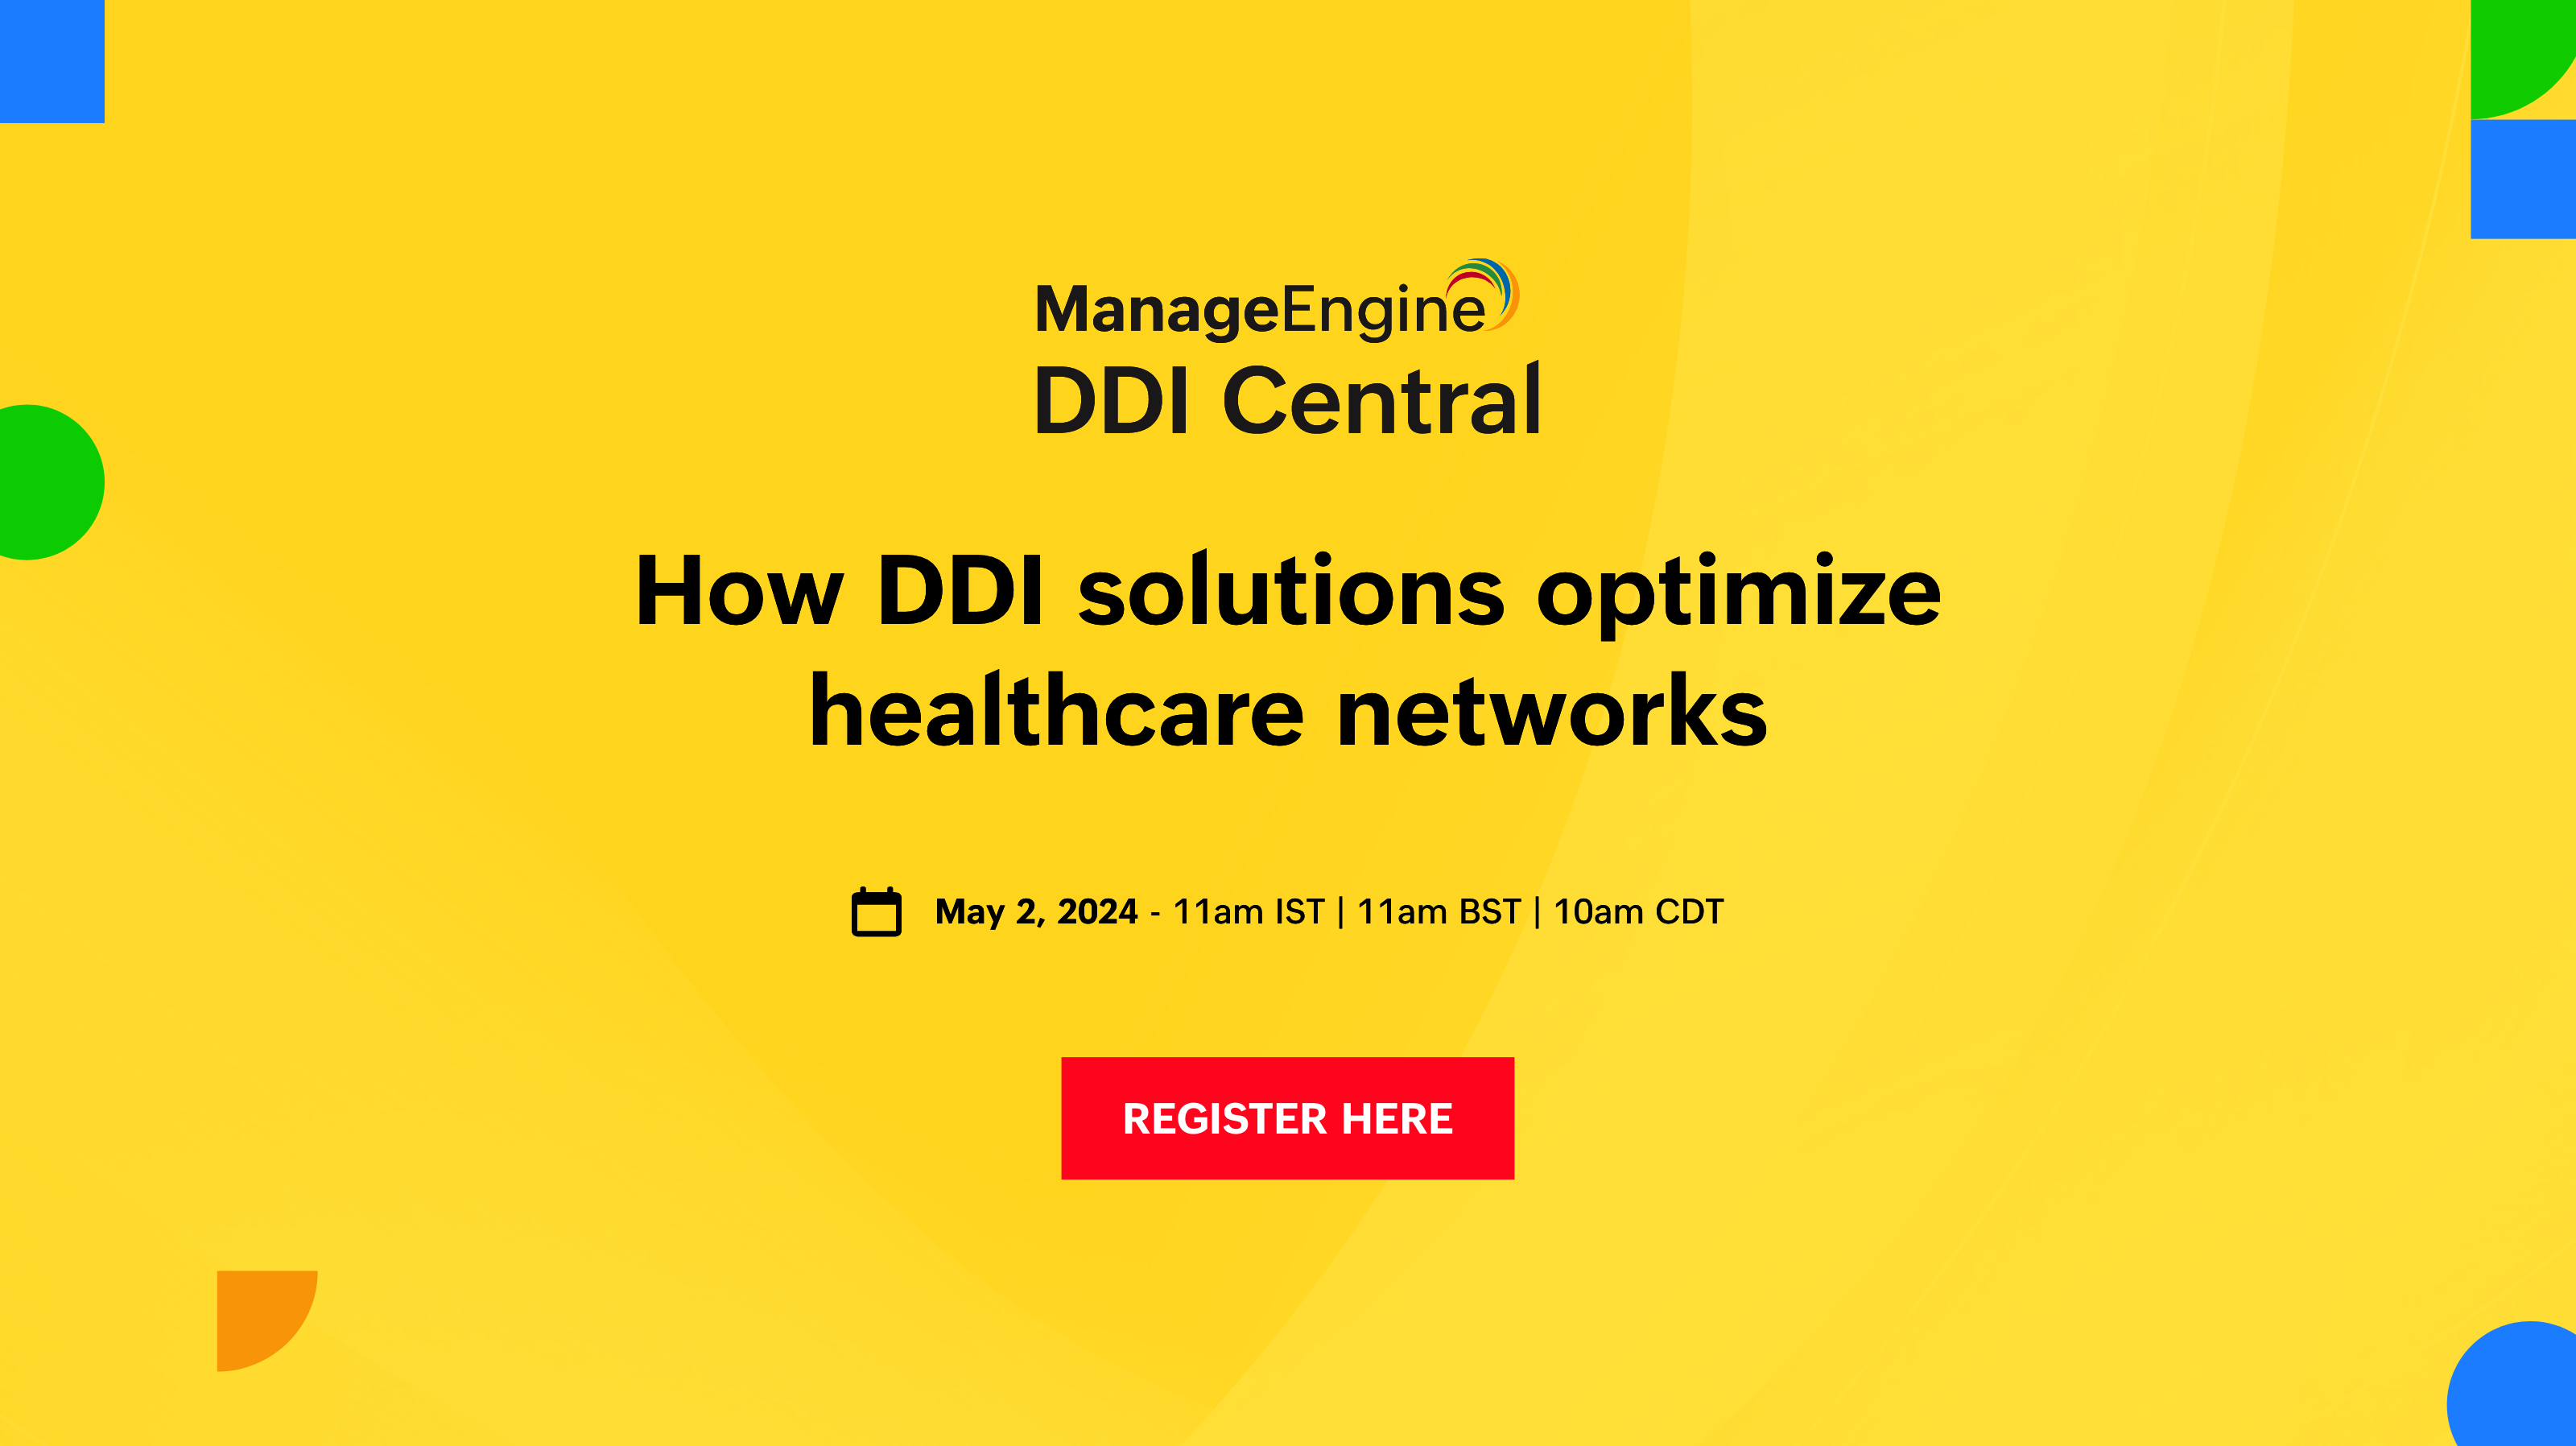 DDI solutions for healthcare networks